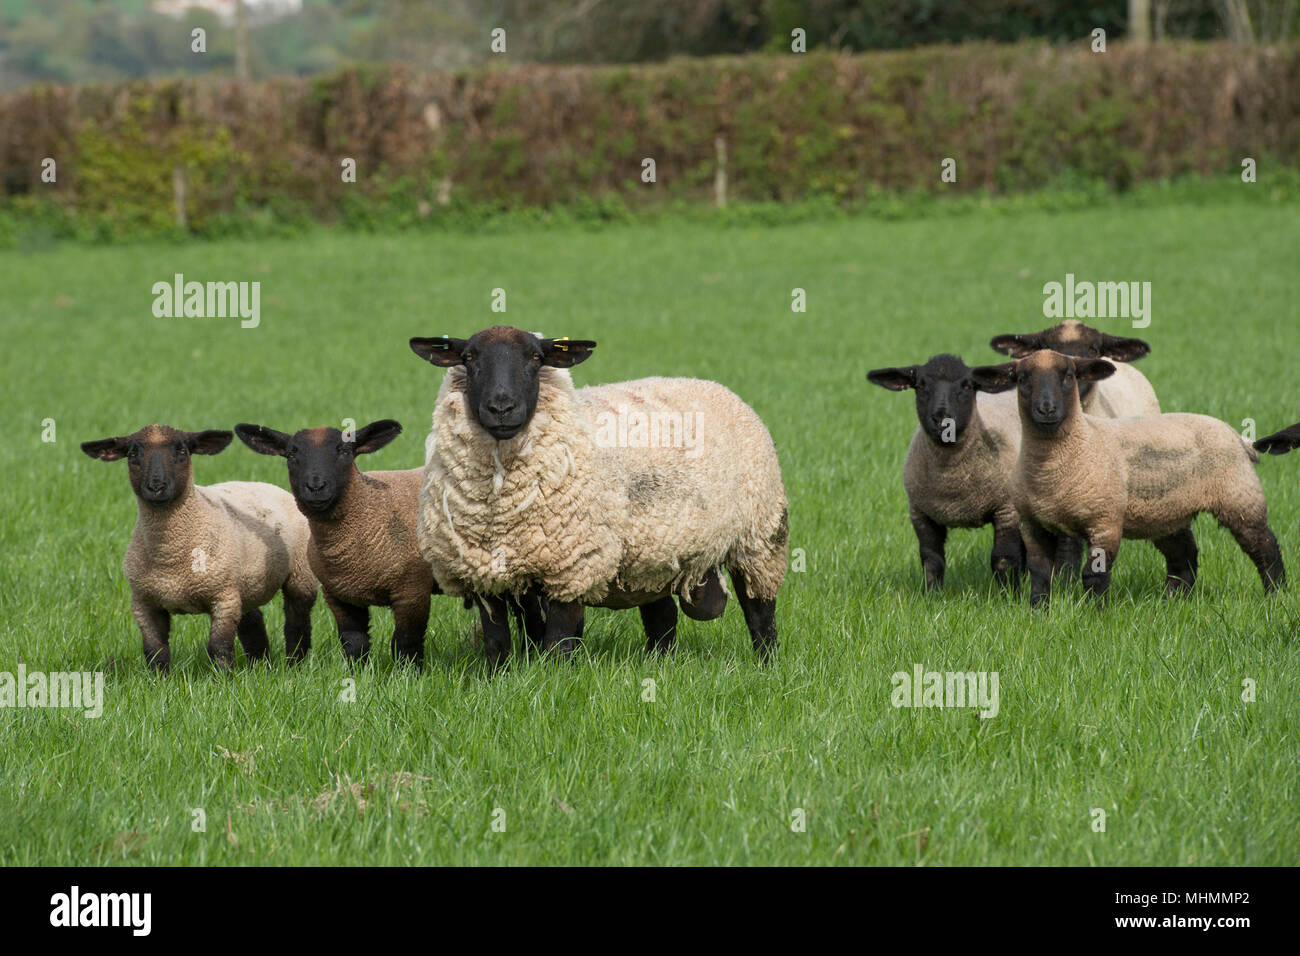 ewes and lambs in a sheep flock Stock Photo